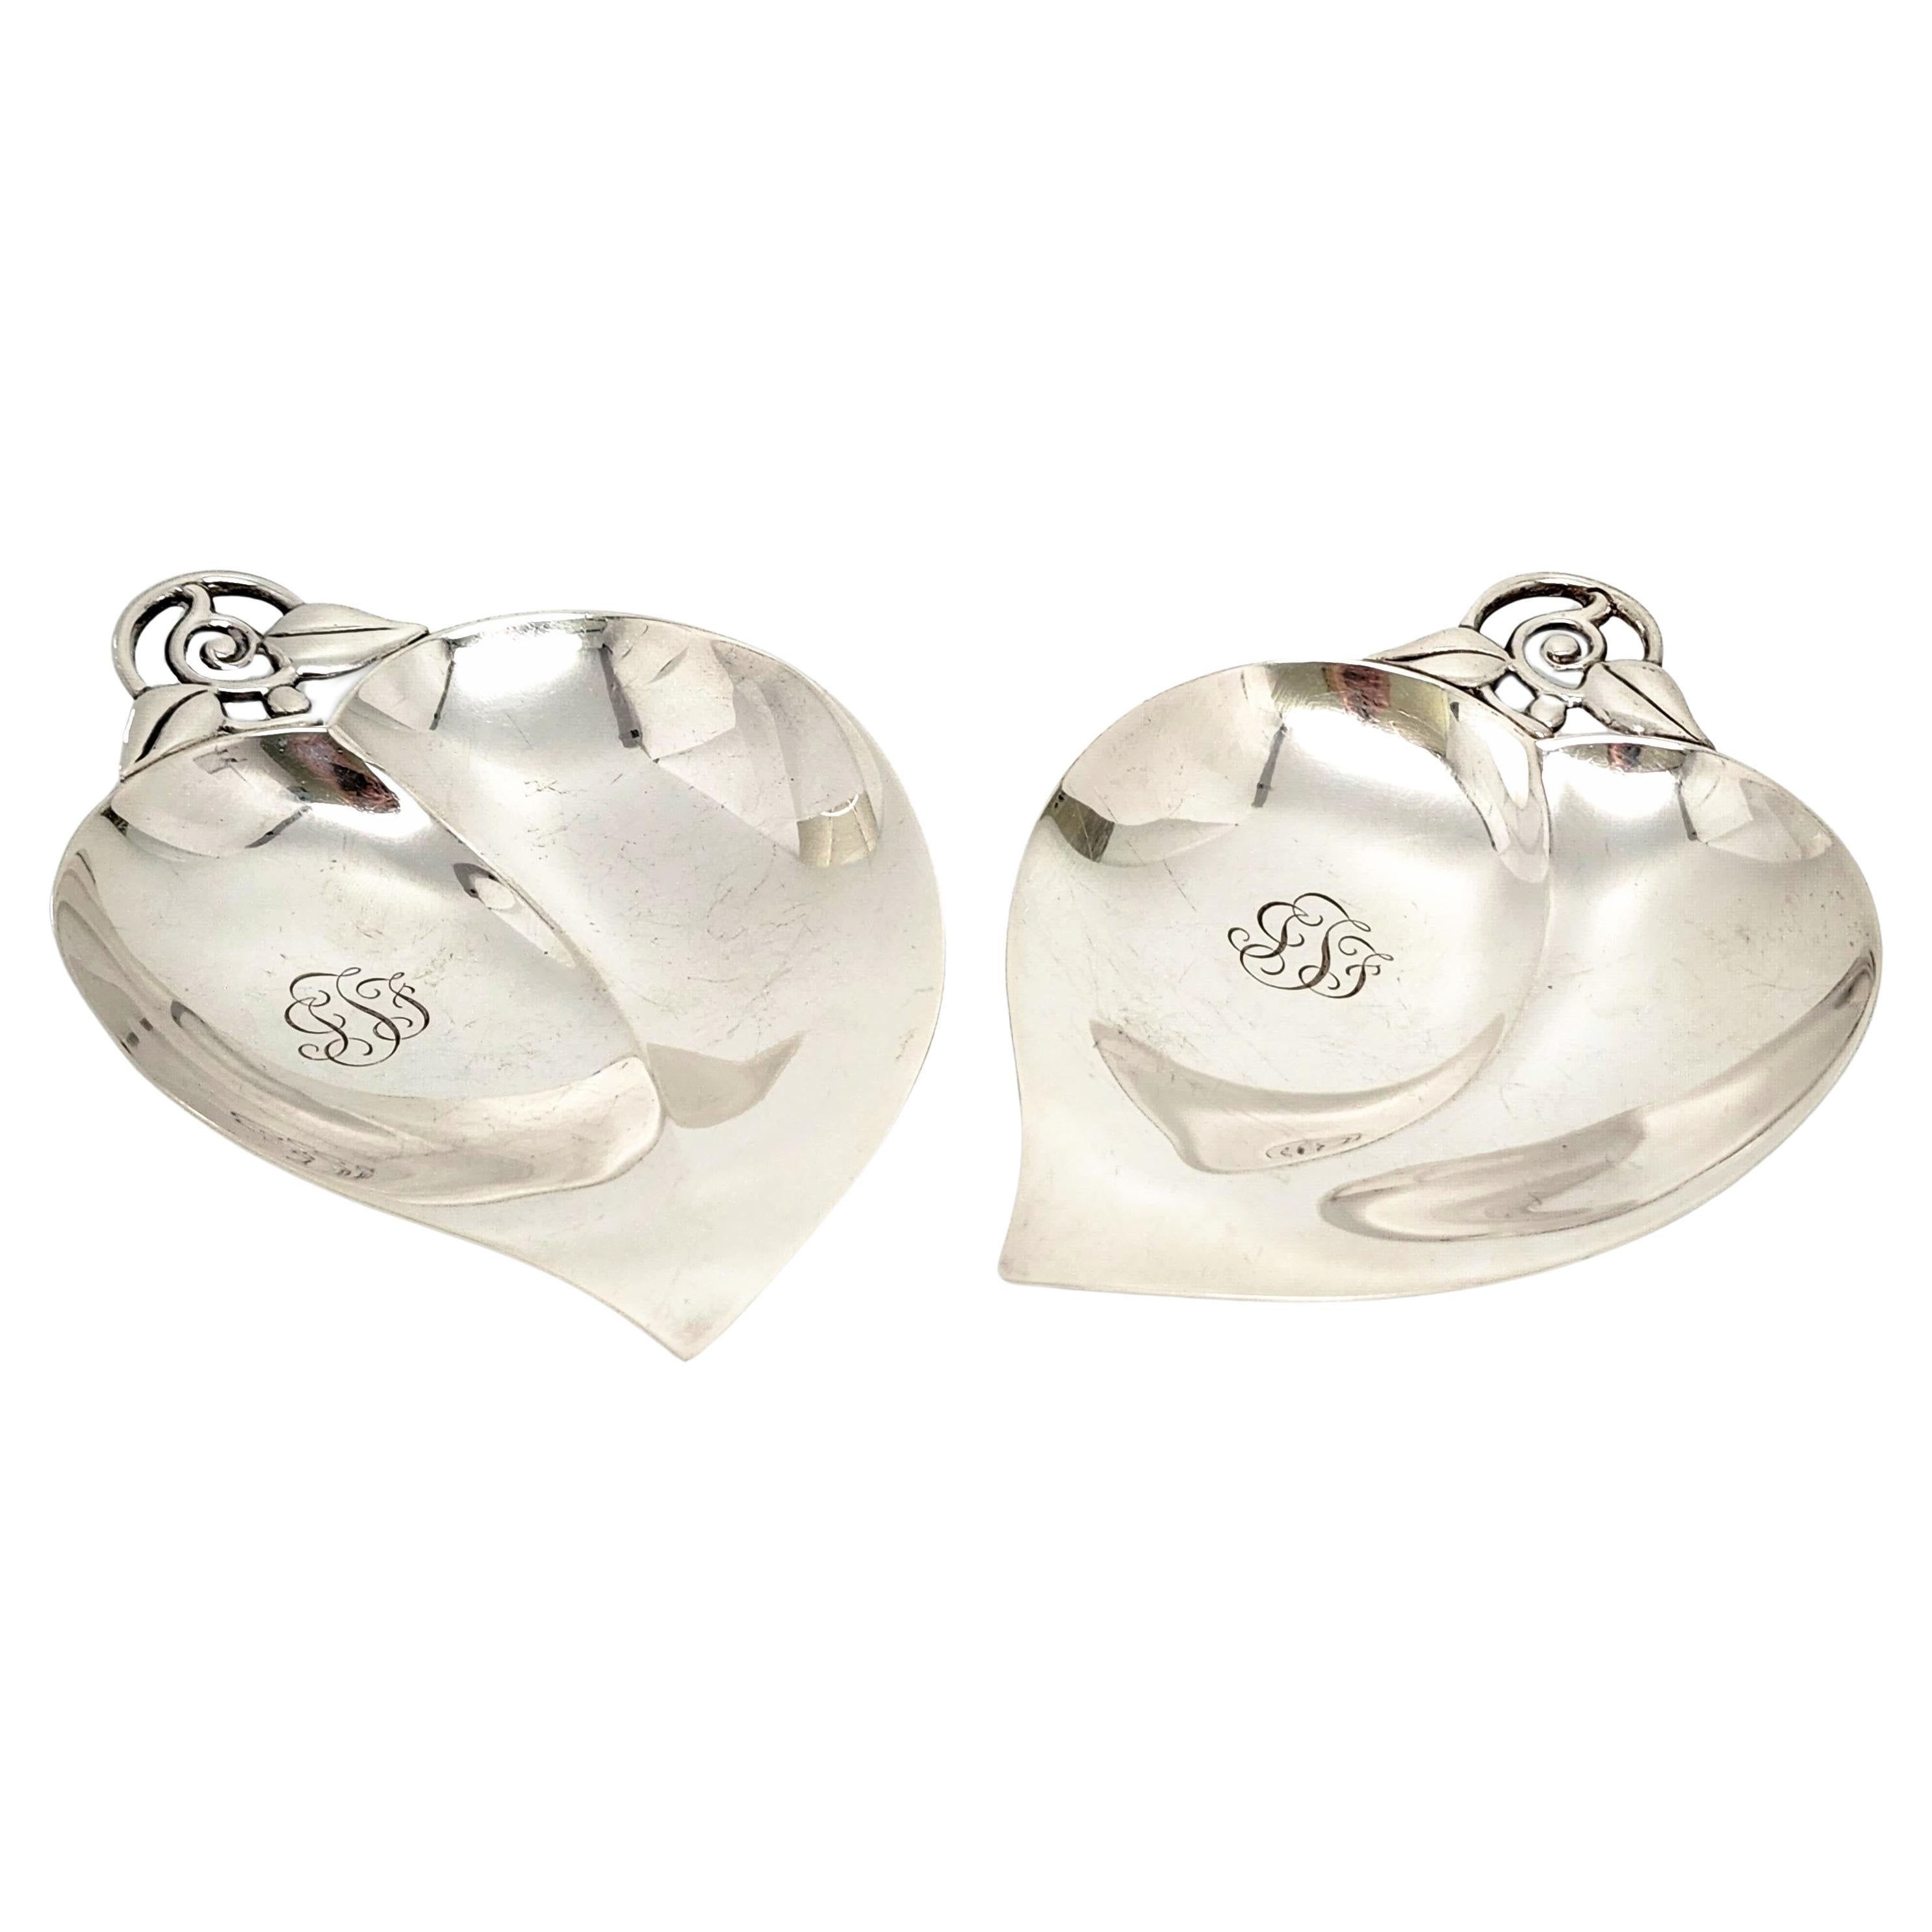 Set of 2 Tiffany & Co Sterling Silver Heart/Apple Bowls with Monogram